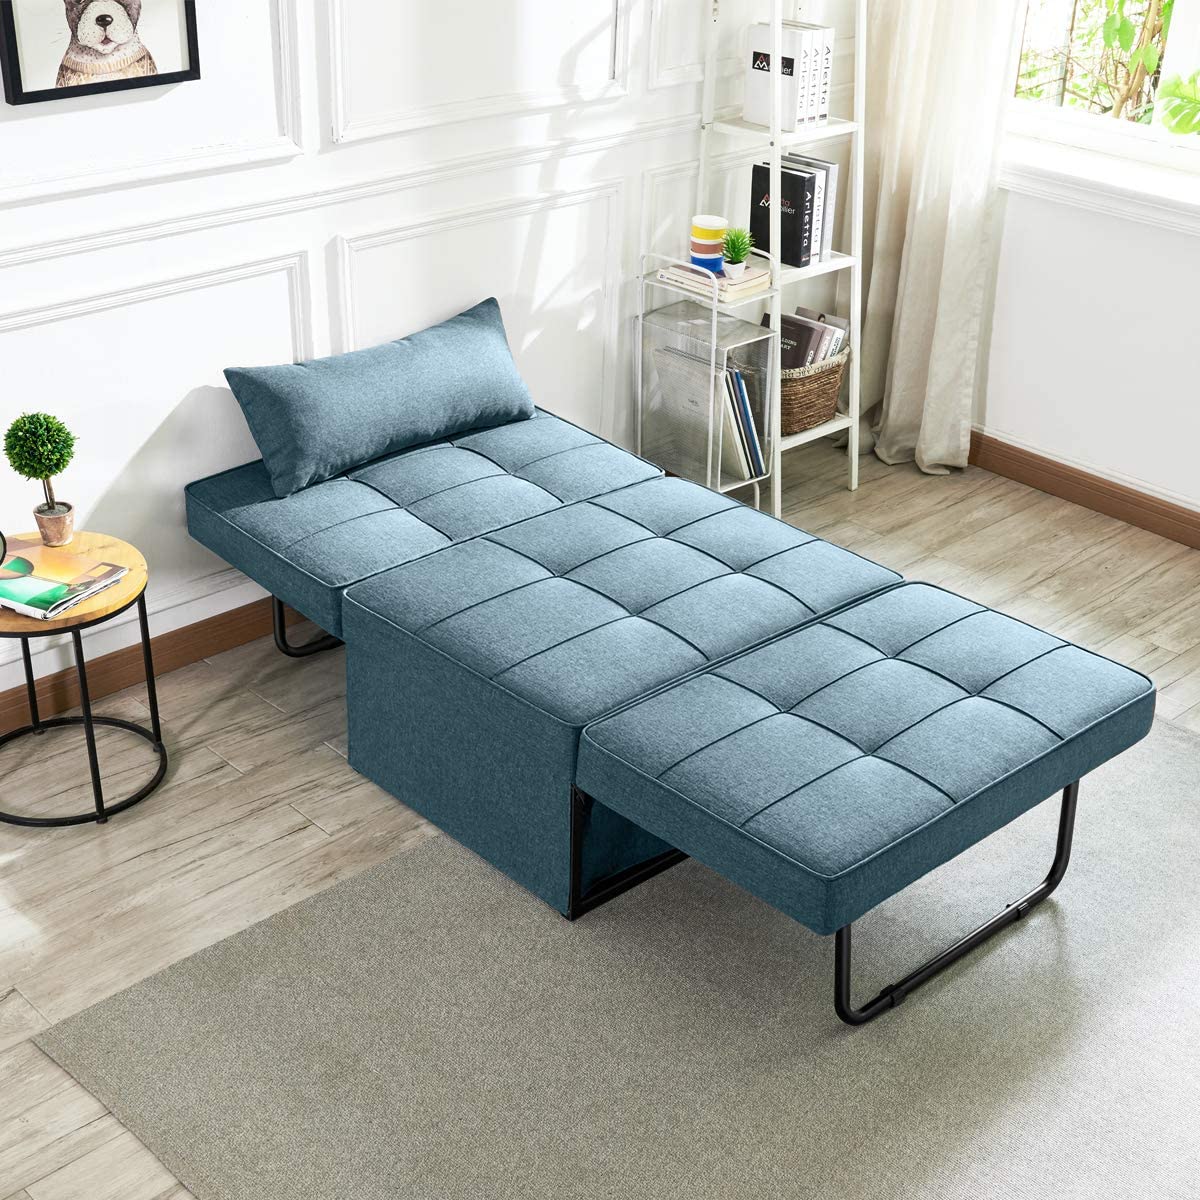 Sofa Bed, 4 in 1 Multi-Function Folding Ottoman Breathable Linen Couch Bed  with Adjustable Backrest Modern Convertible Chair for Living Room Apartment